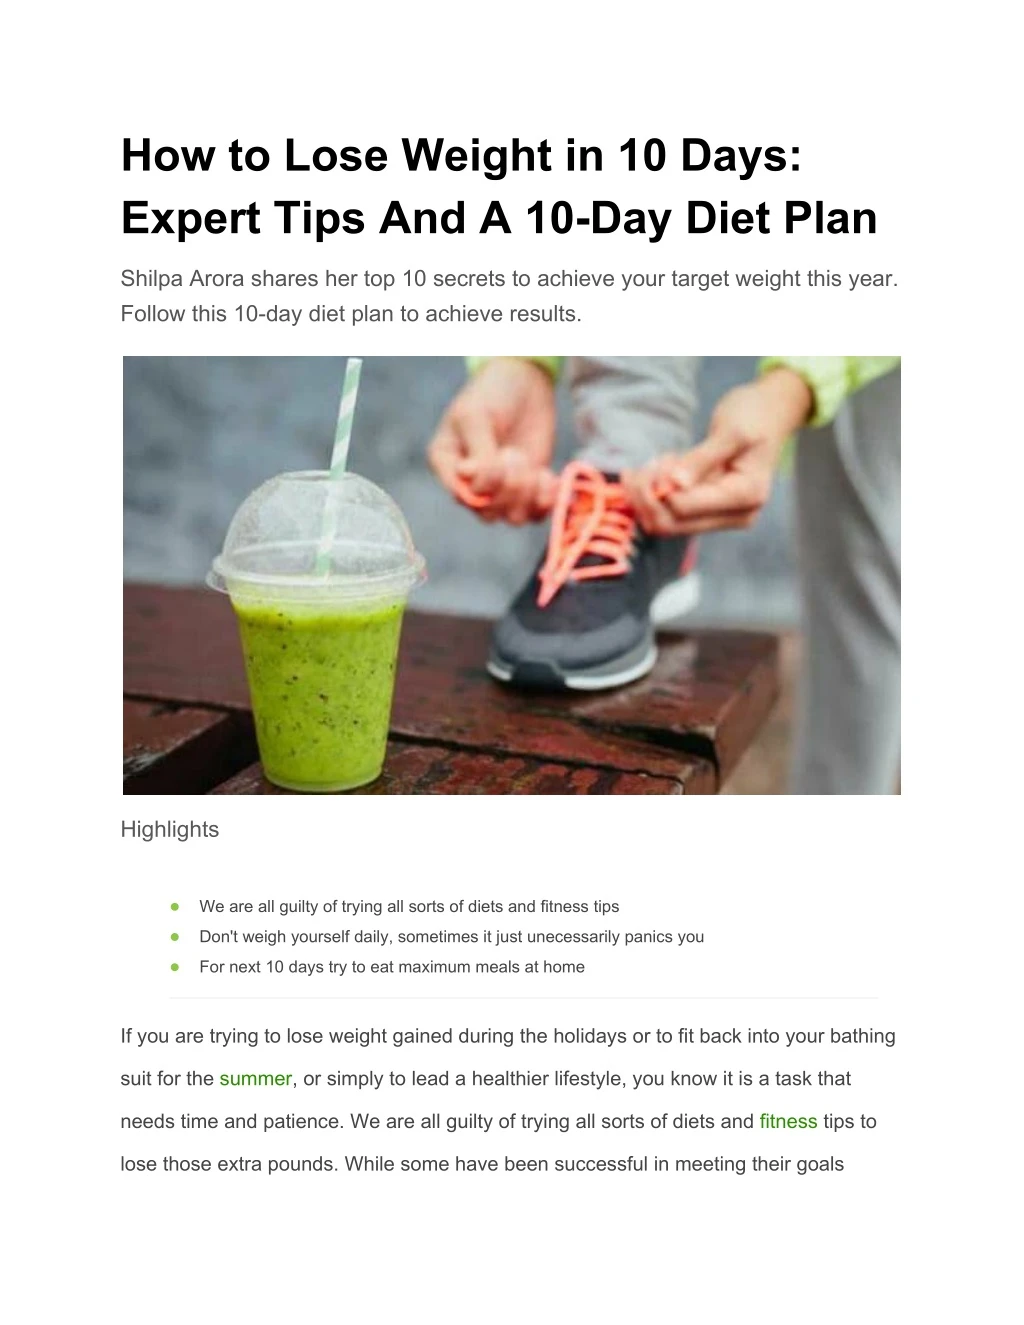 how to lose weight in 10 days expert tips